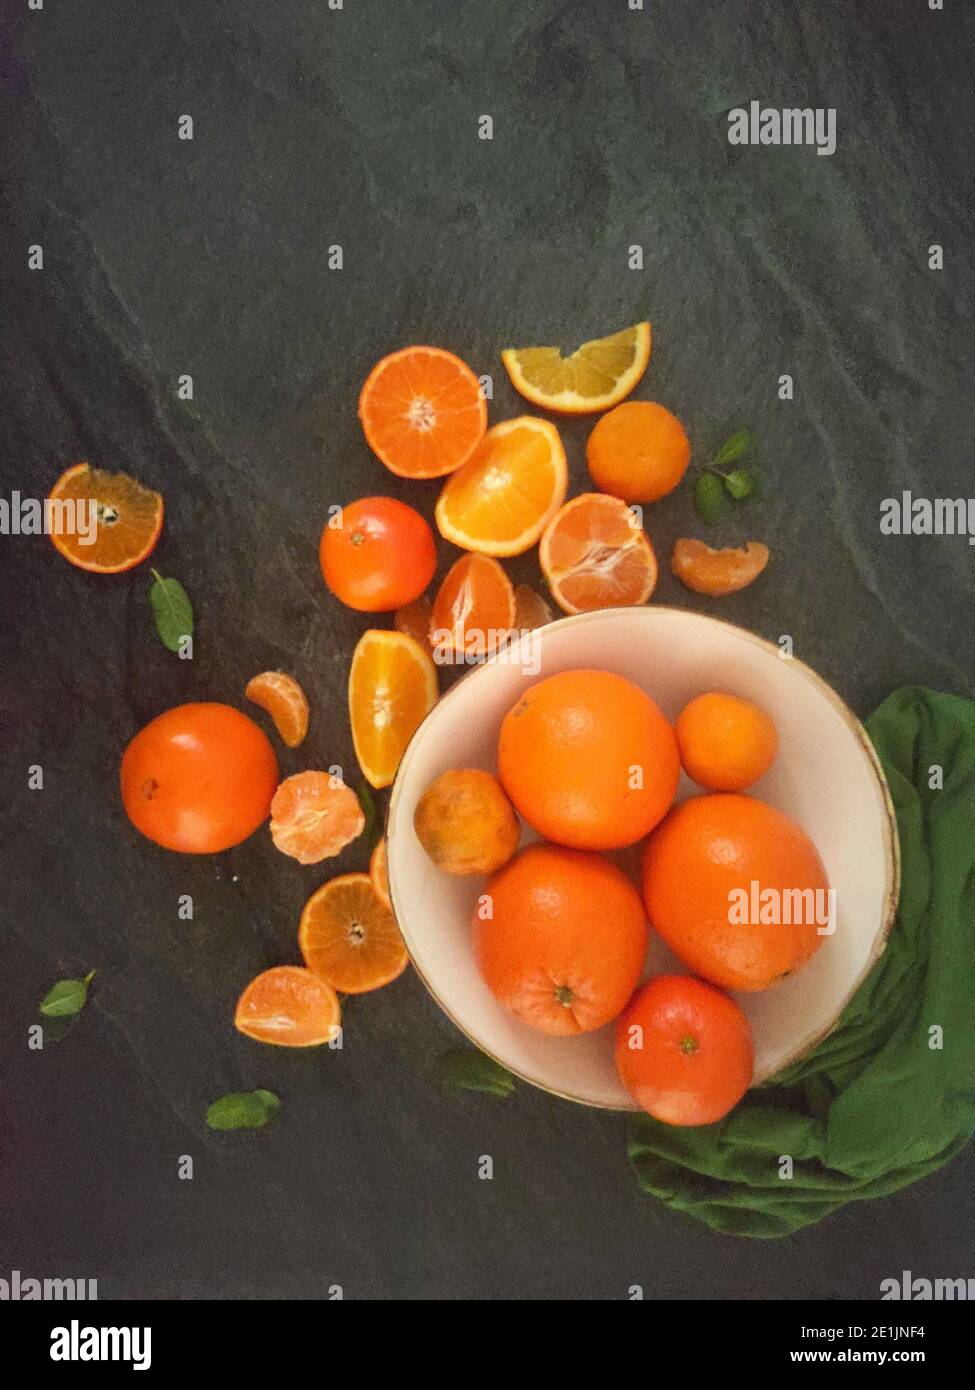 Whole and sliced oranges on a luxury dark background under the sunlight Stock Photo